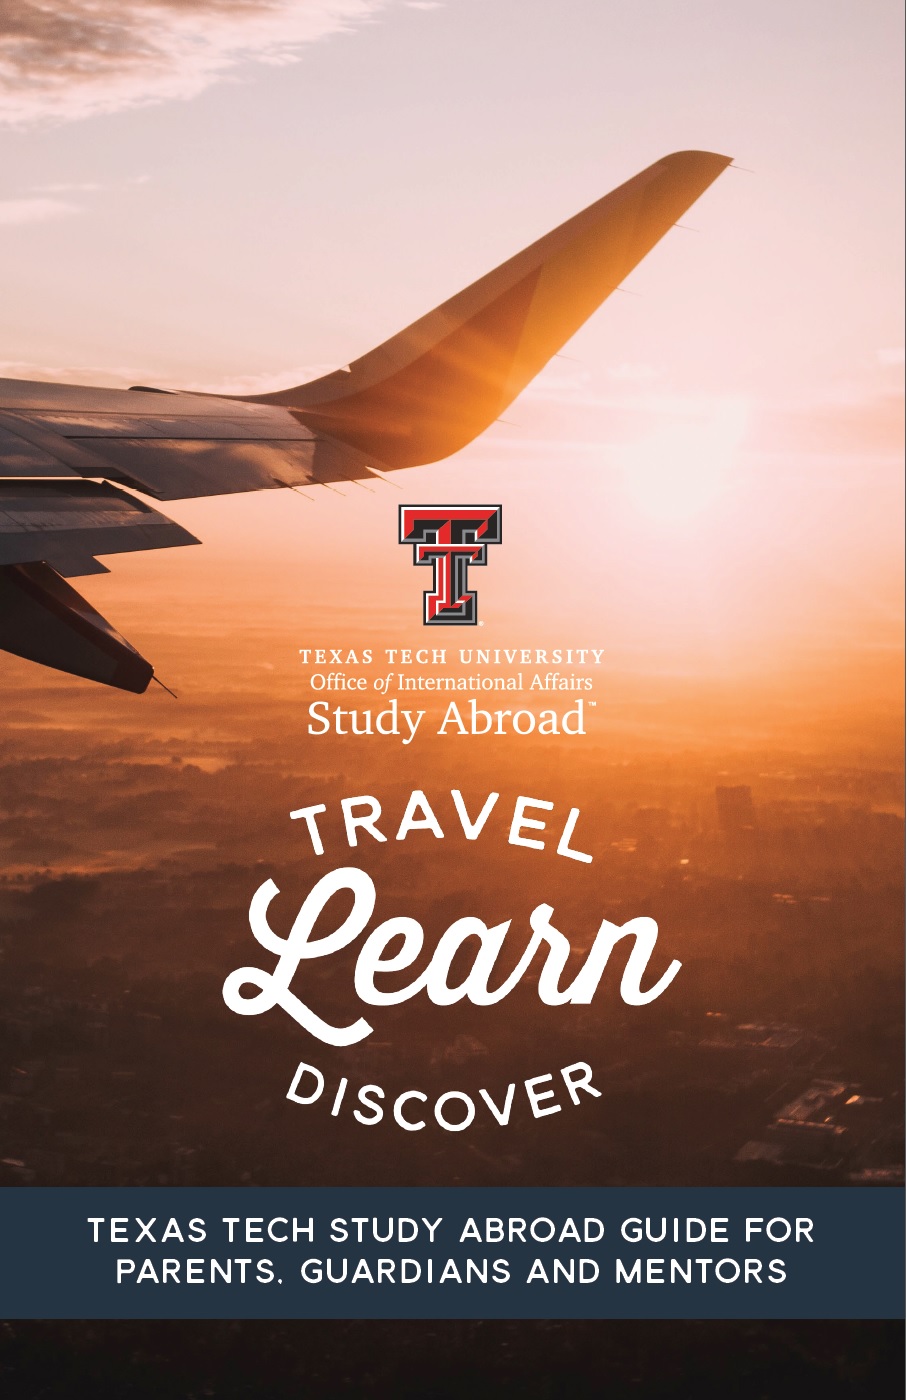 TTU Study Abroad guide for parents and families